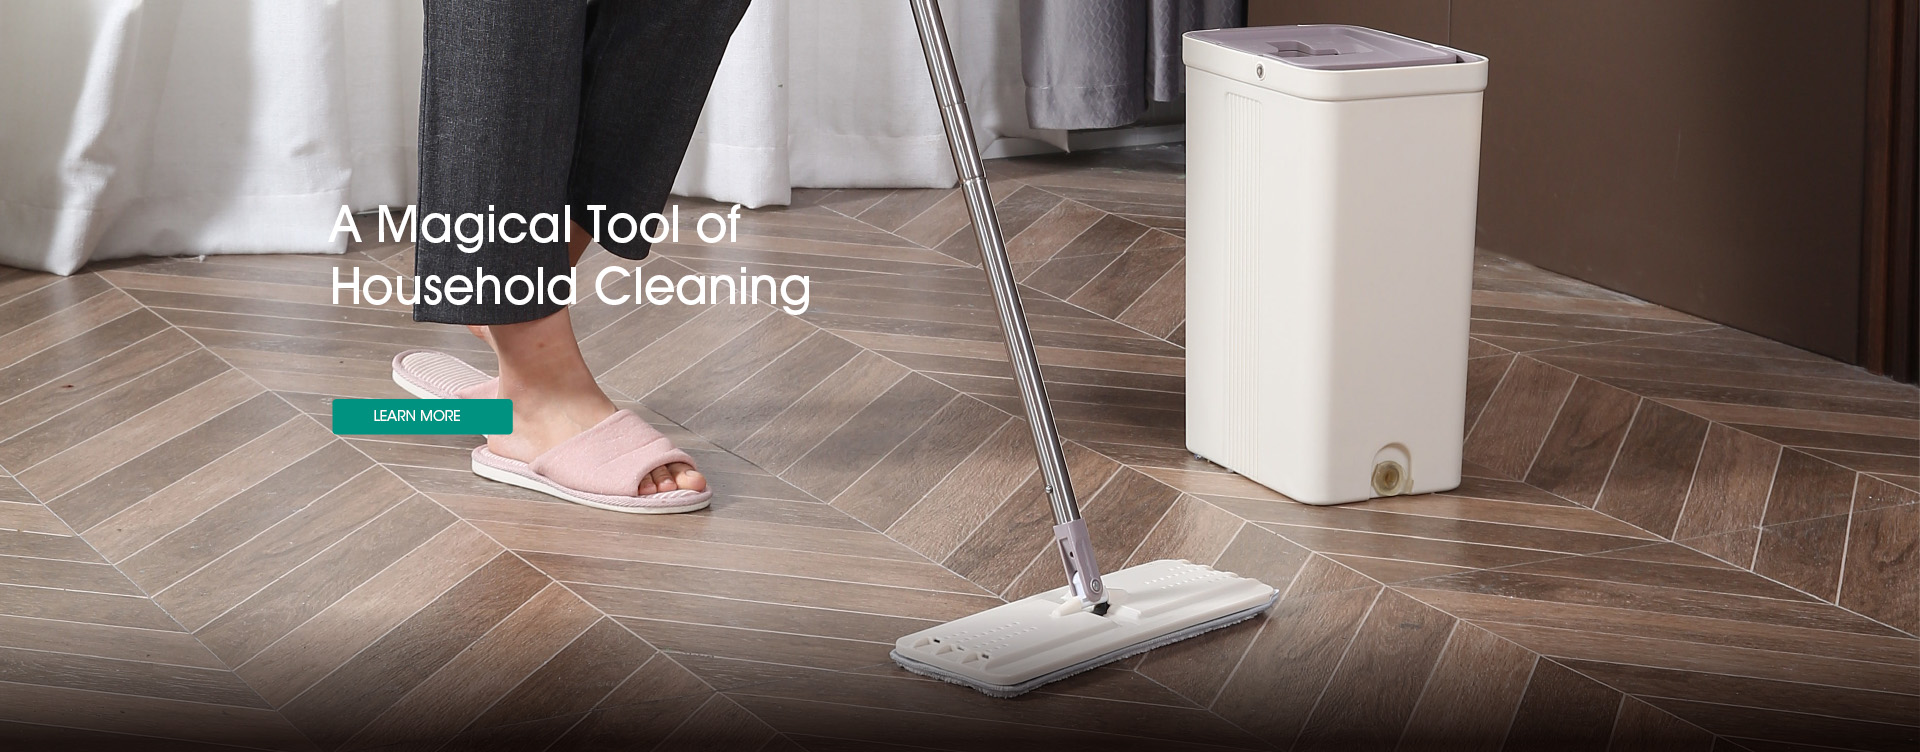 A Magical Tool of Household Cleaning